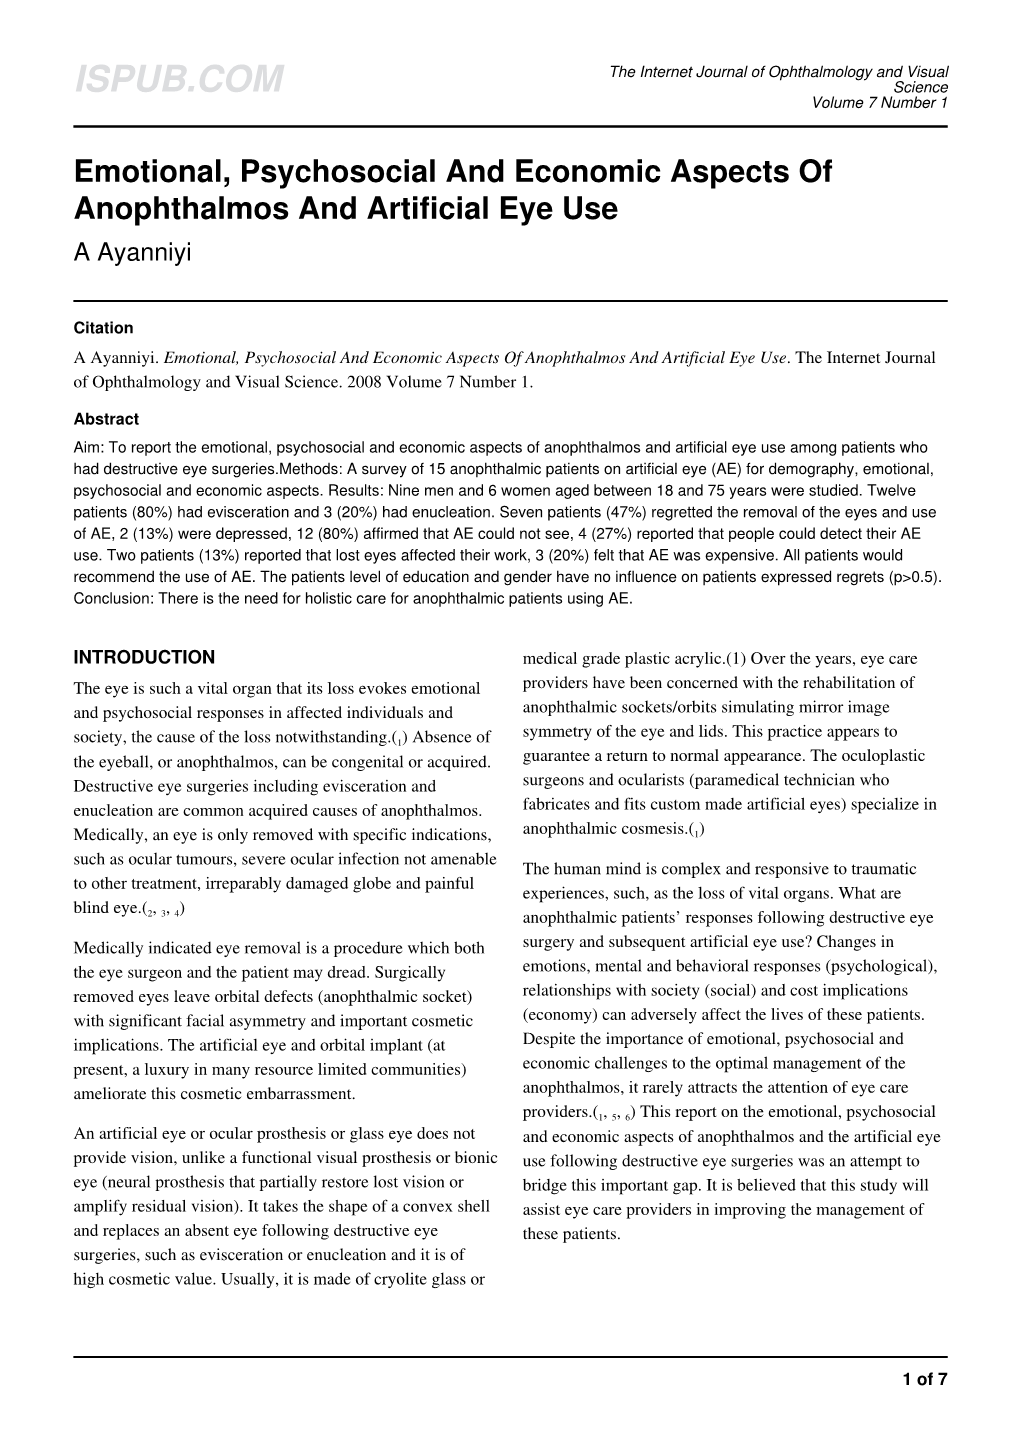 Emotional, Psychosocial and Economic Aspects of Anophthalmos and Artificial Eye Use a Ayanniyi